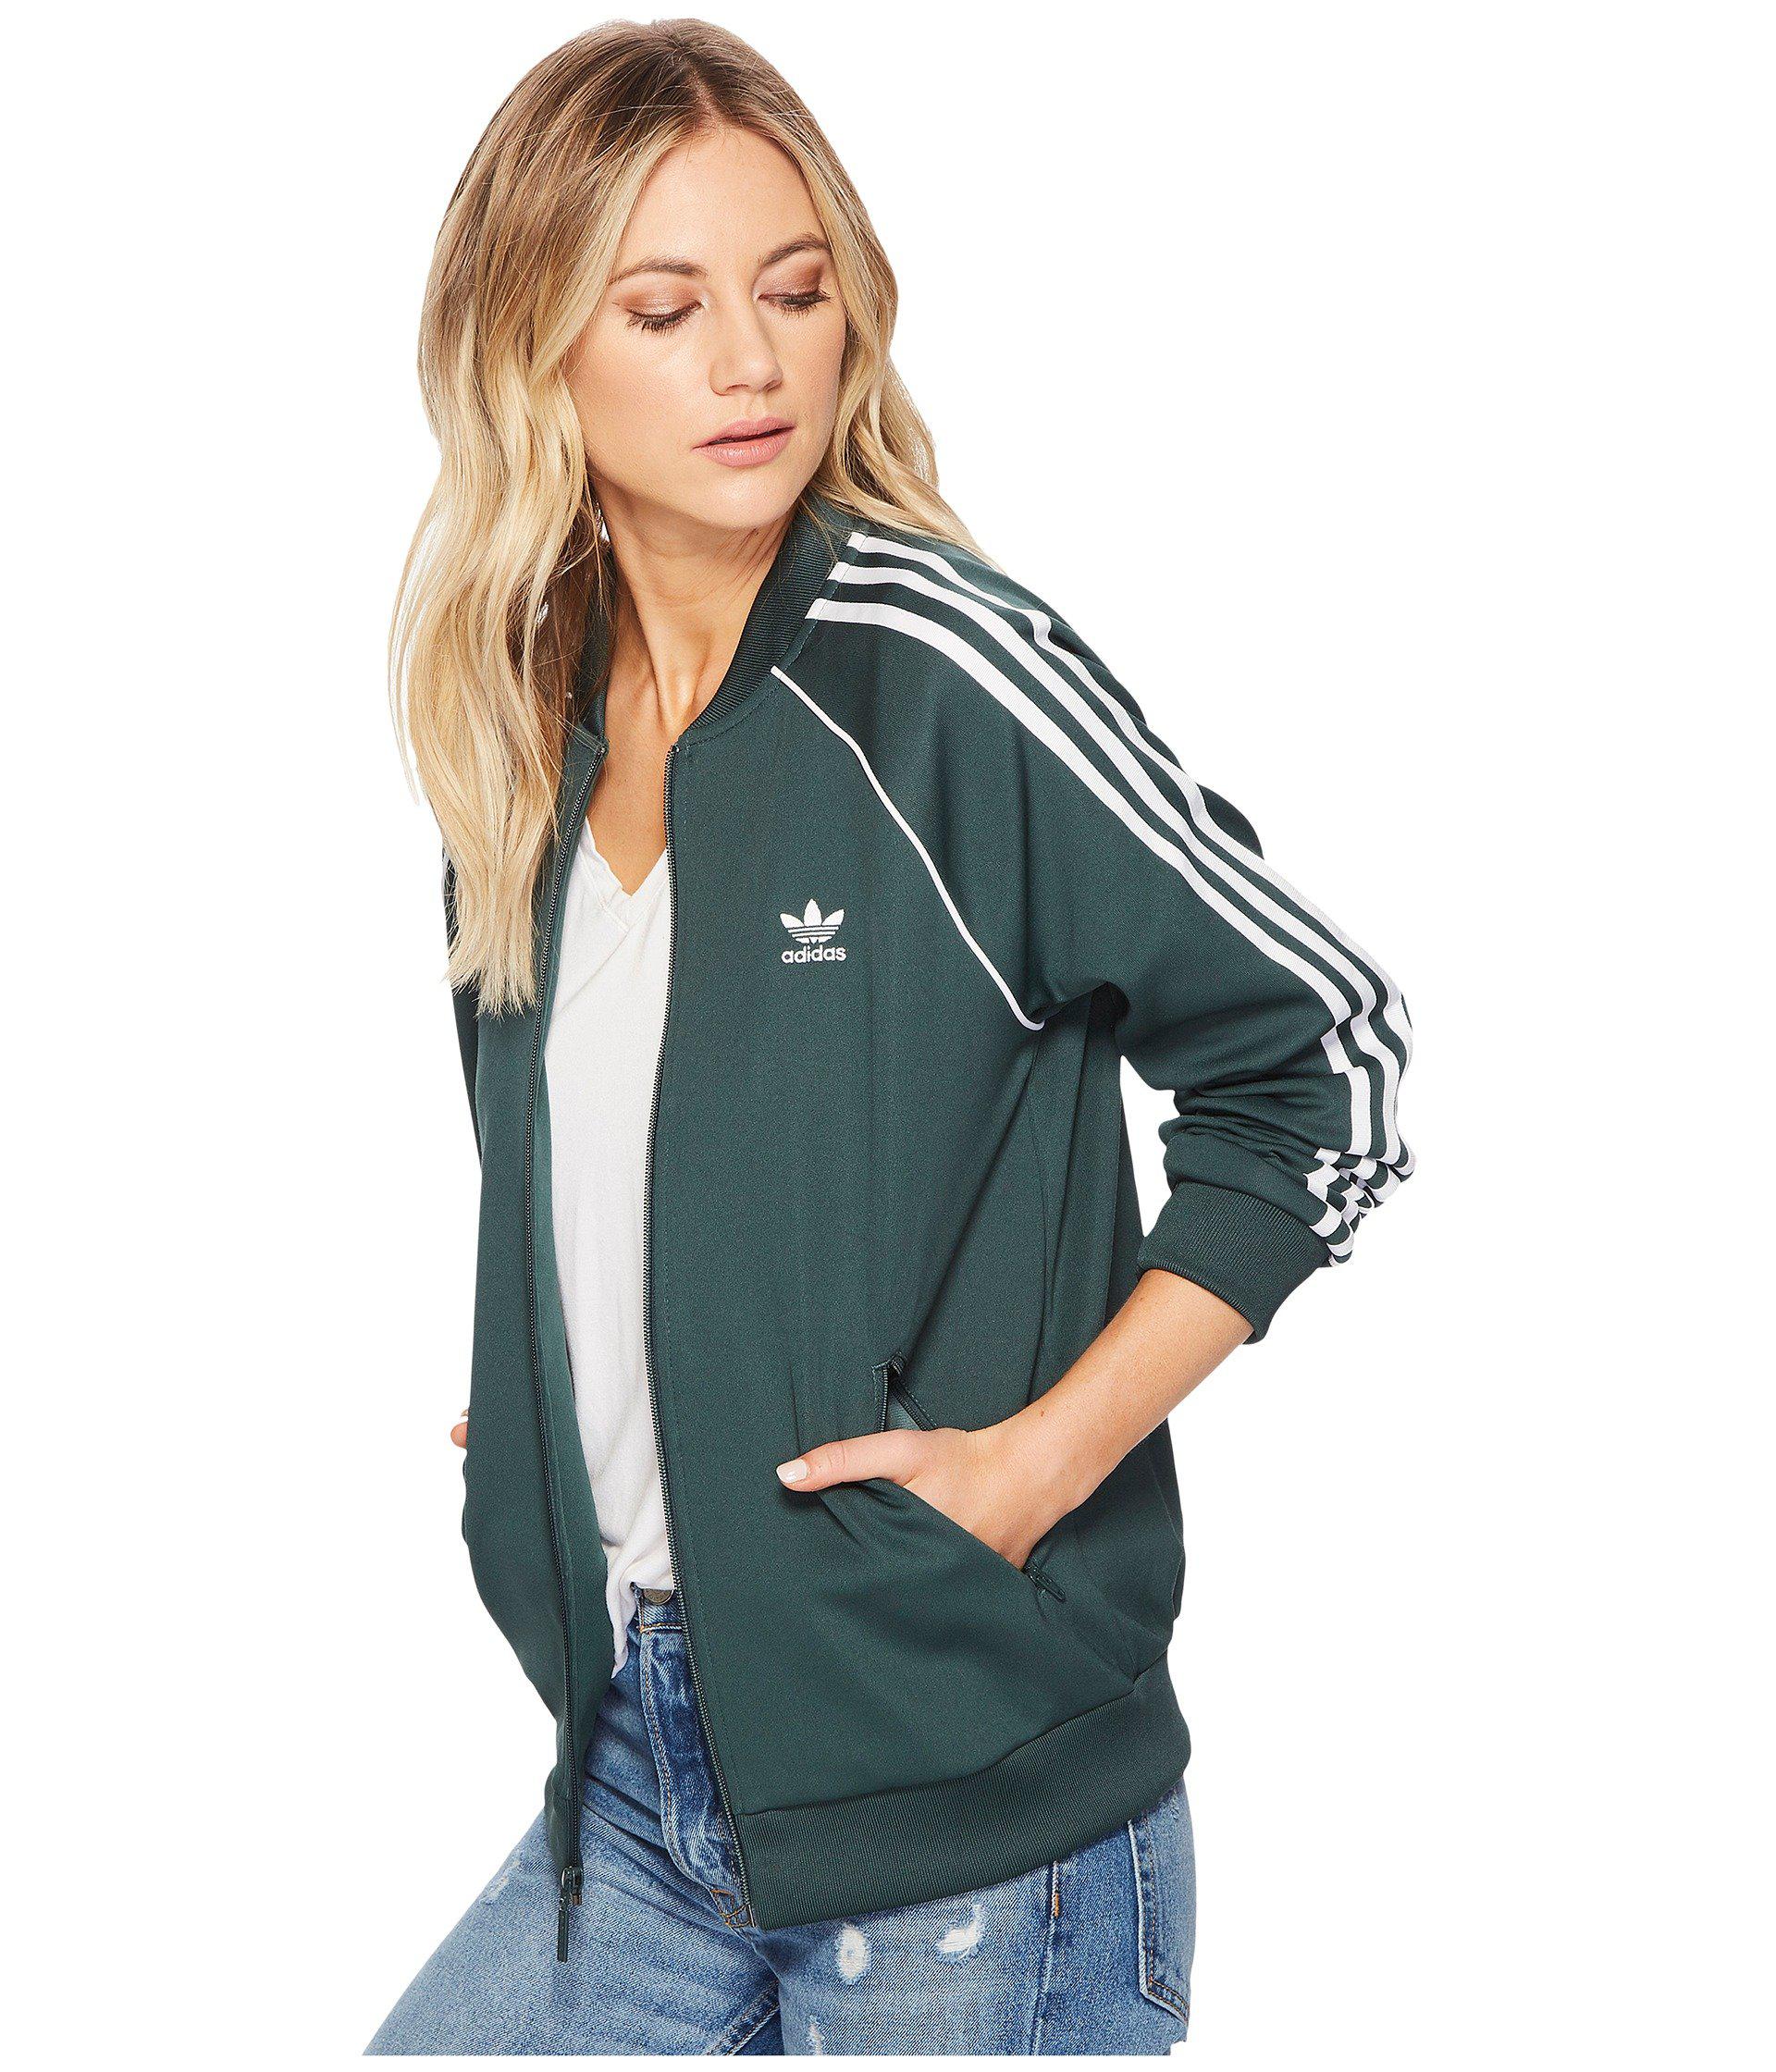 Buy > adidas track jacket green > in stock